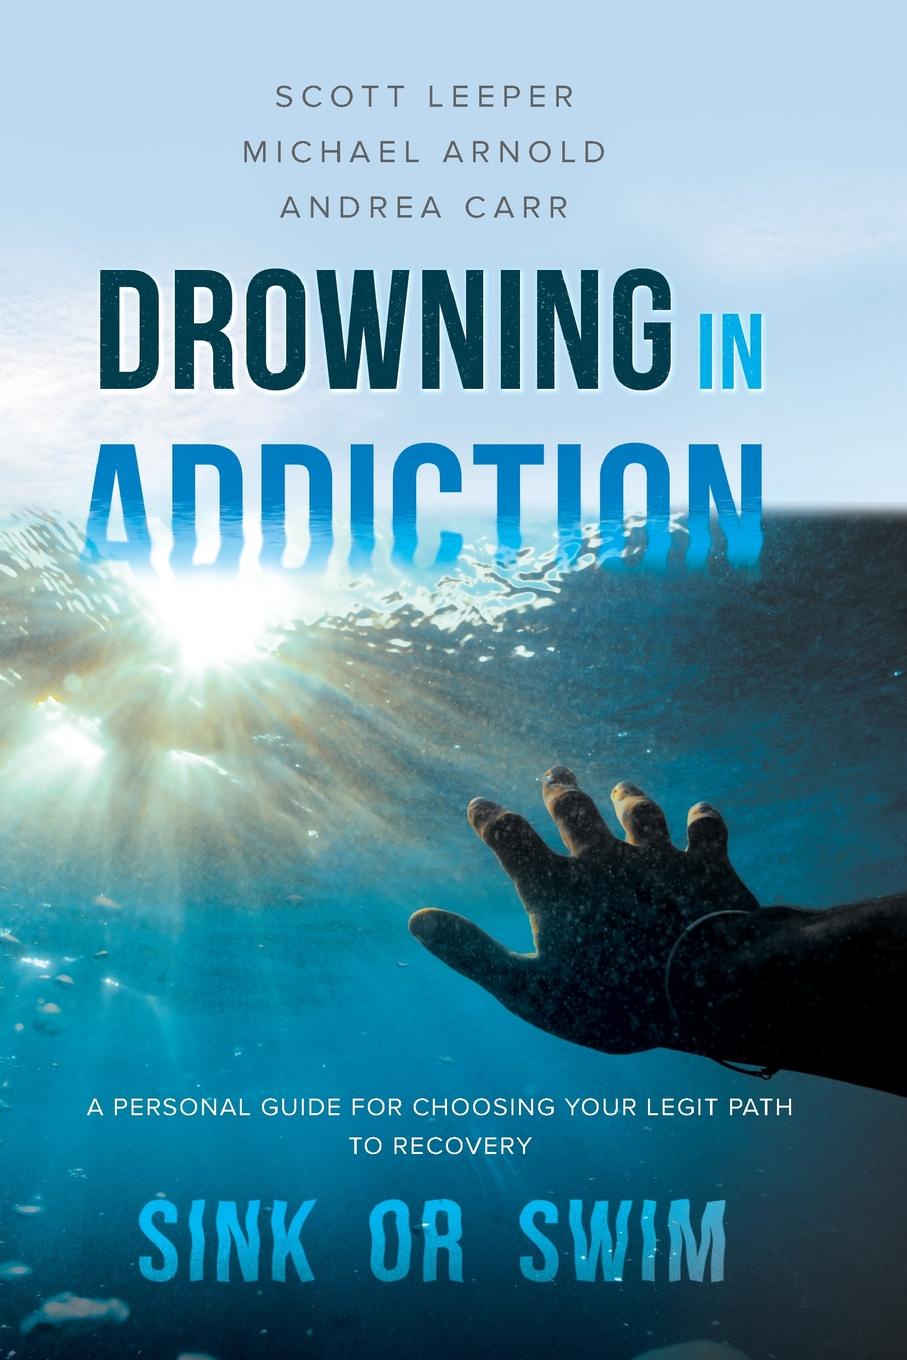 Drowning in Addiction. Sink or Swim: A Personal Guide for Choosing Your Legit Path to Recovery